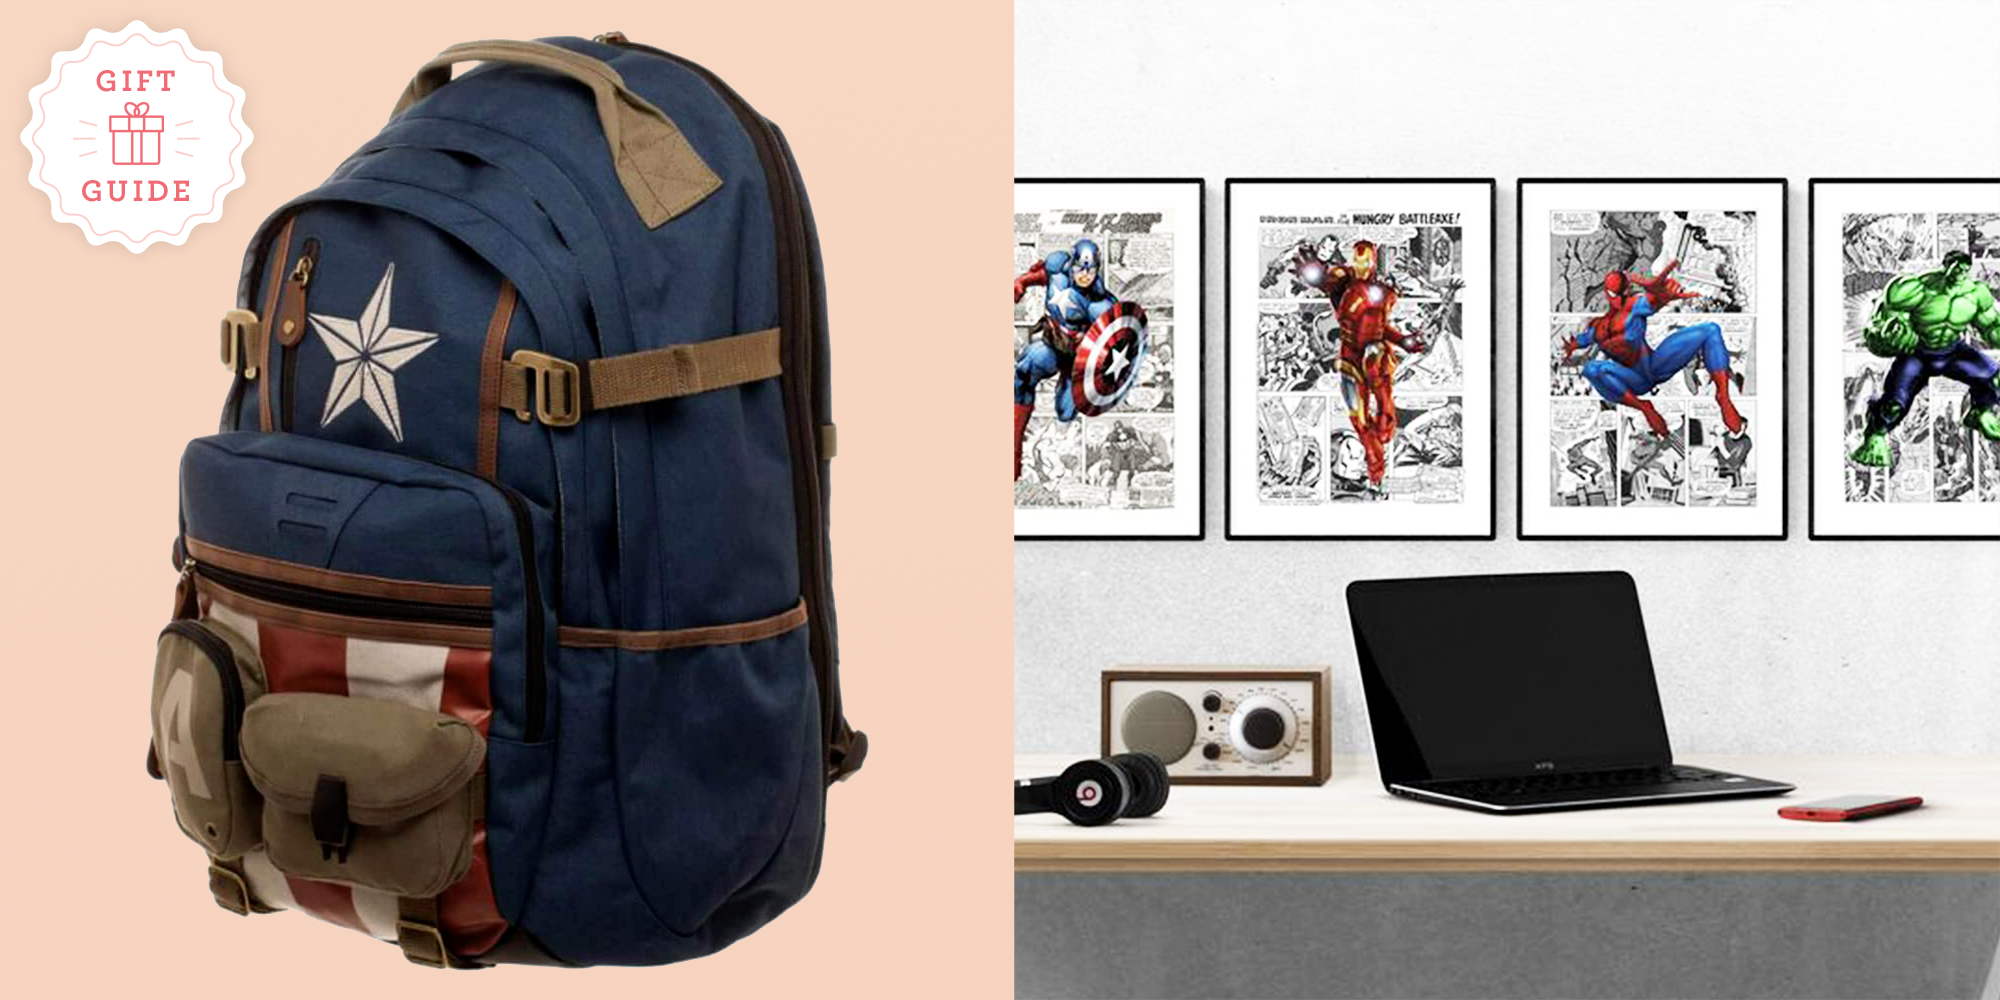 39 Best Marvel Gifts - Avengers Gifts 